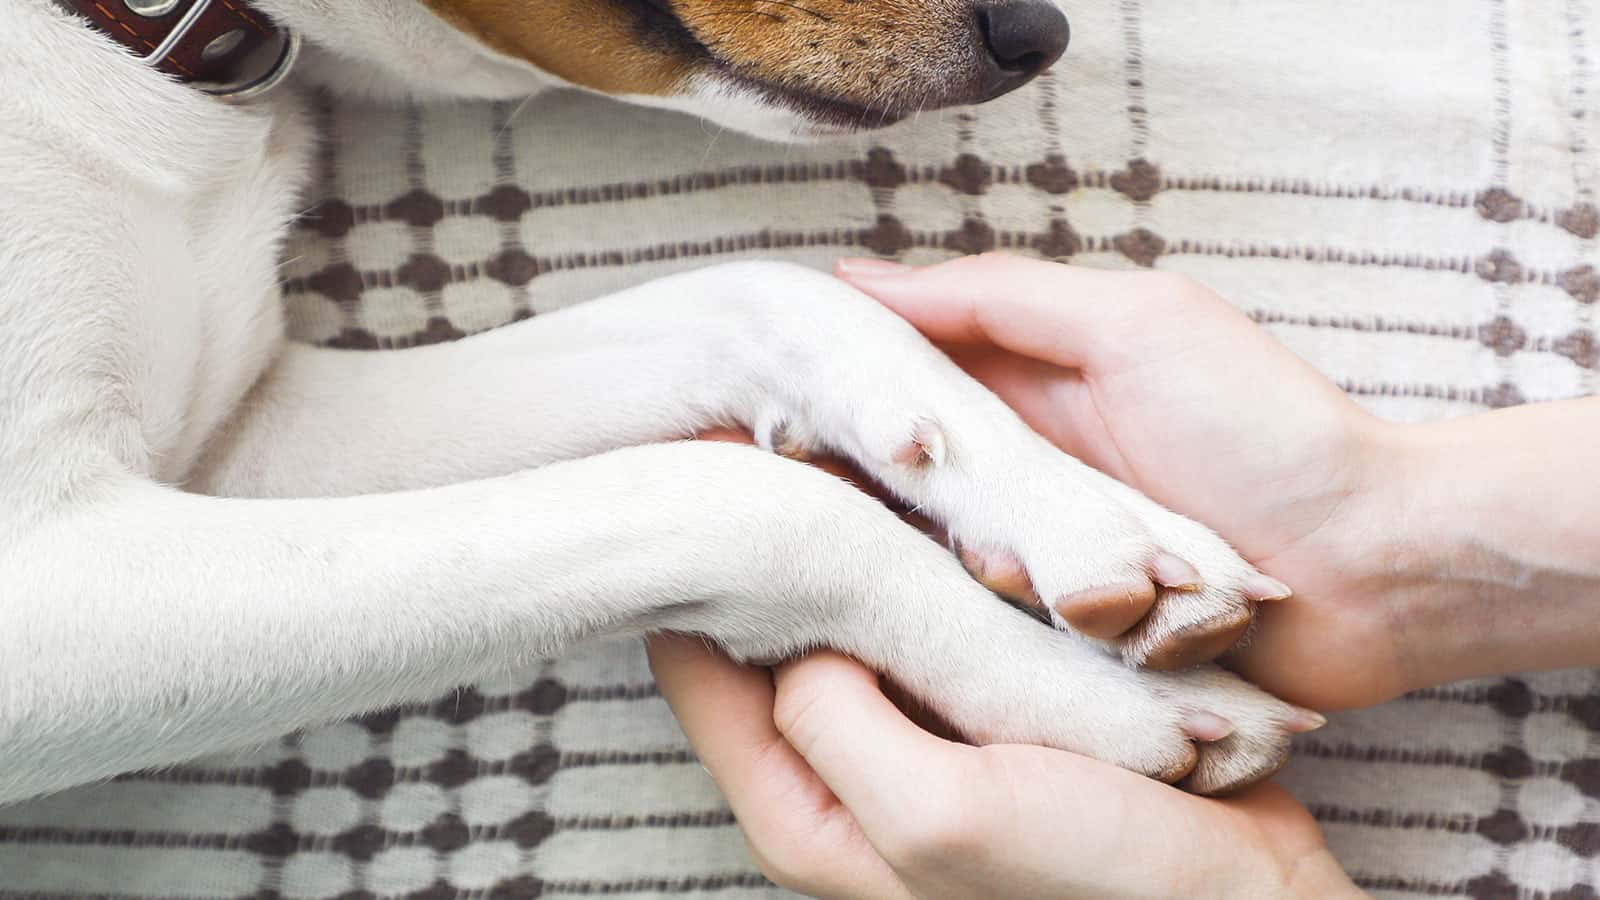 Psychology Explains How to Deal With the Grief of Losing a Pet